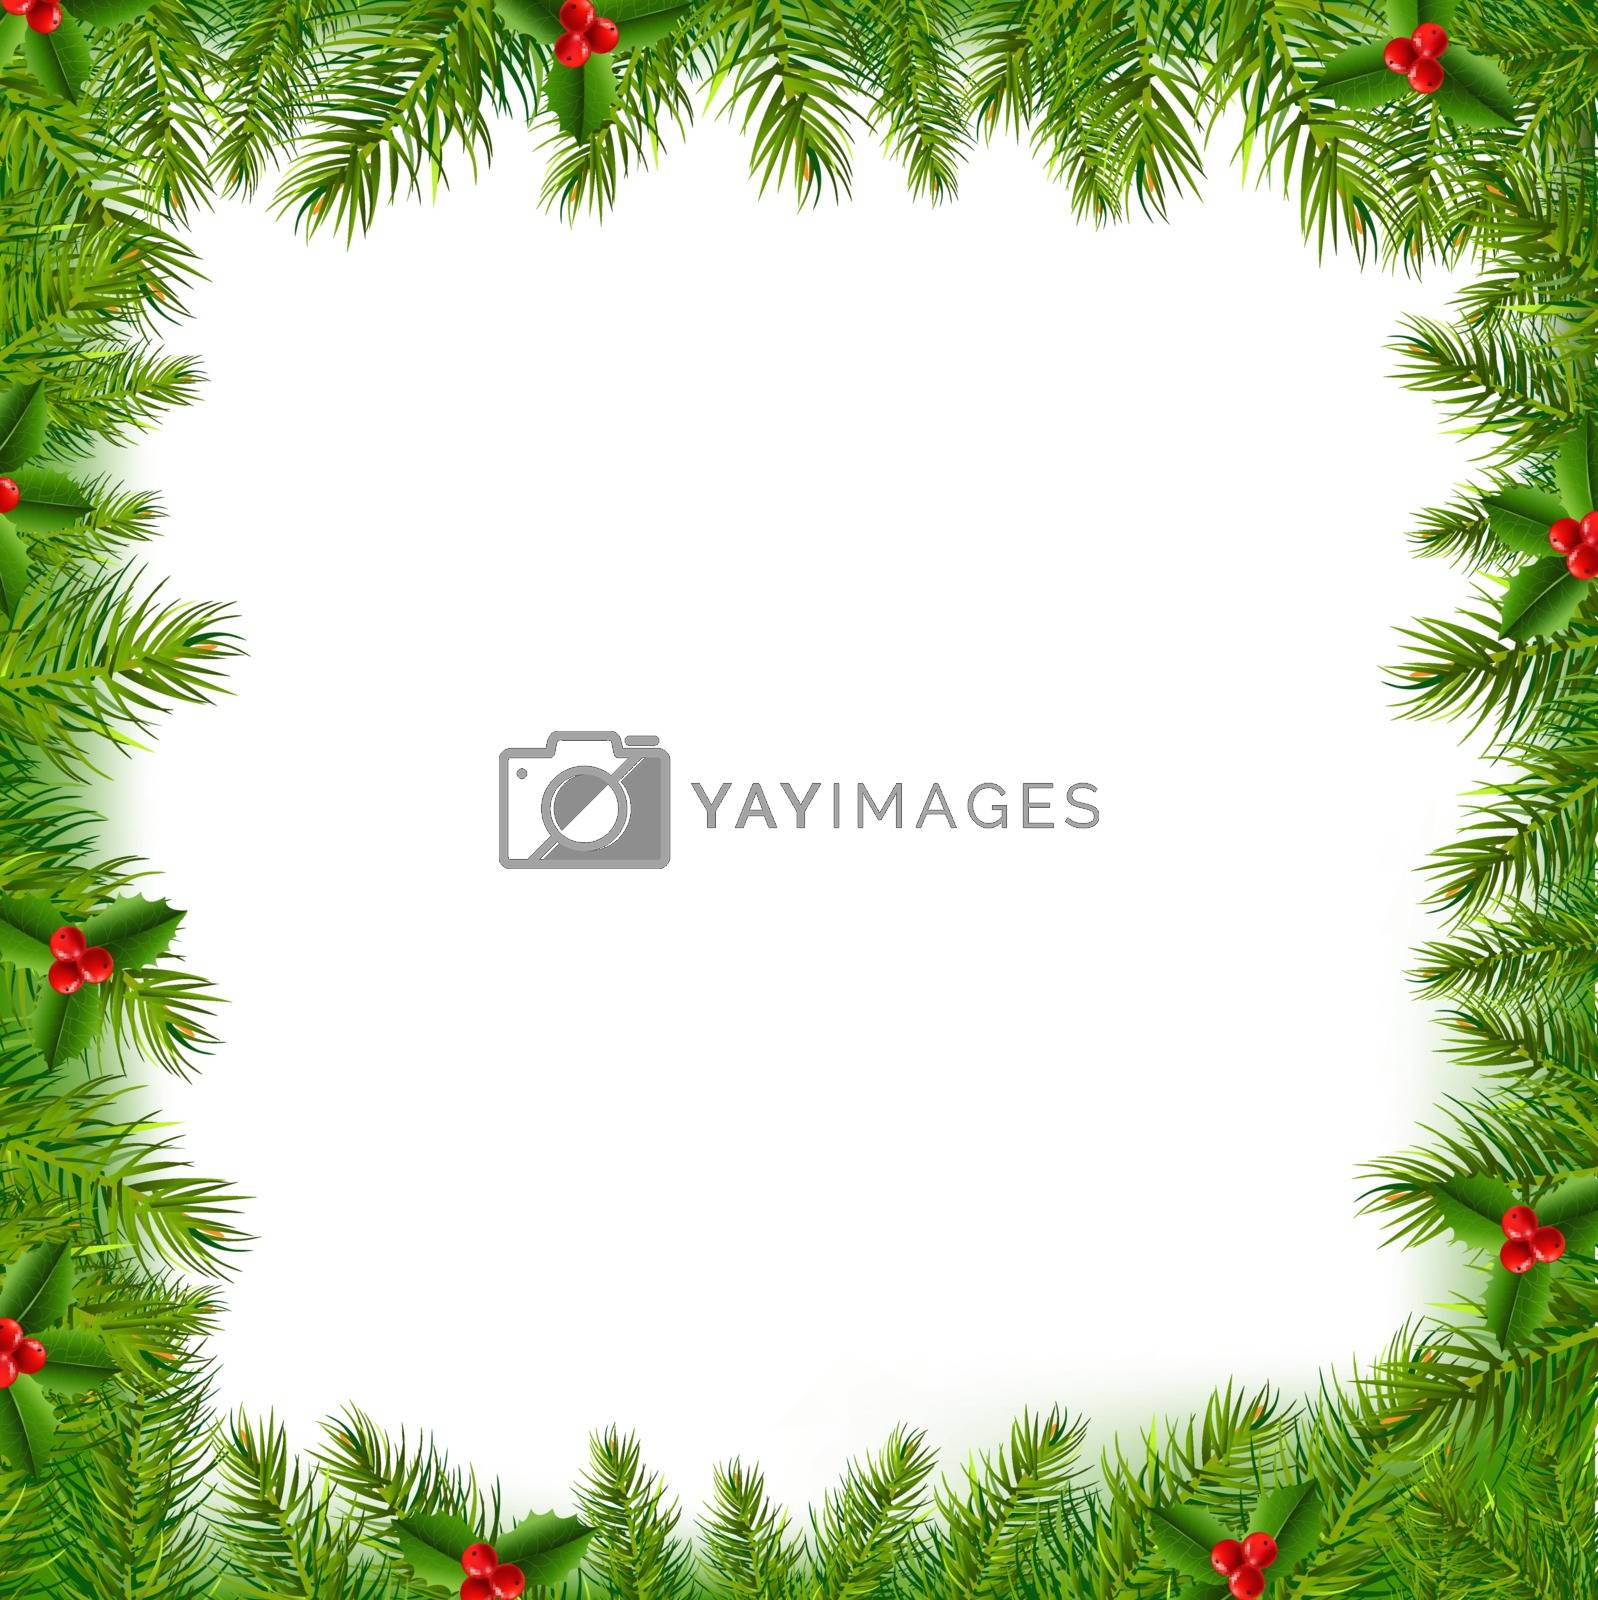 Royalty free image of Xmas Frame Isolated by barbaliss